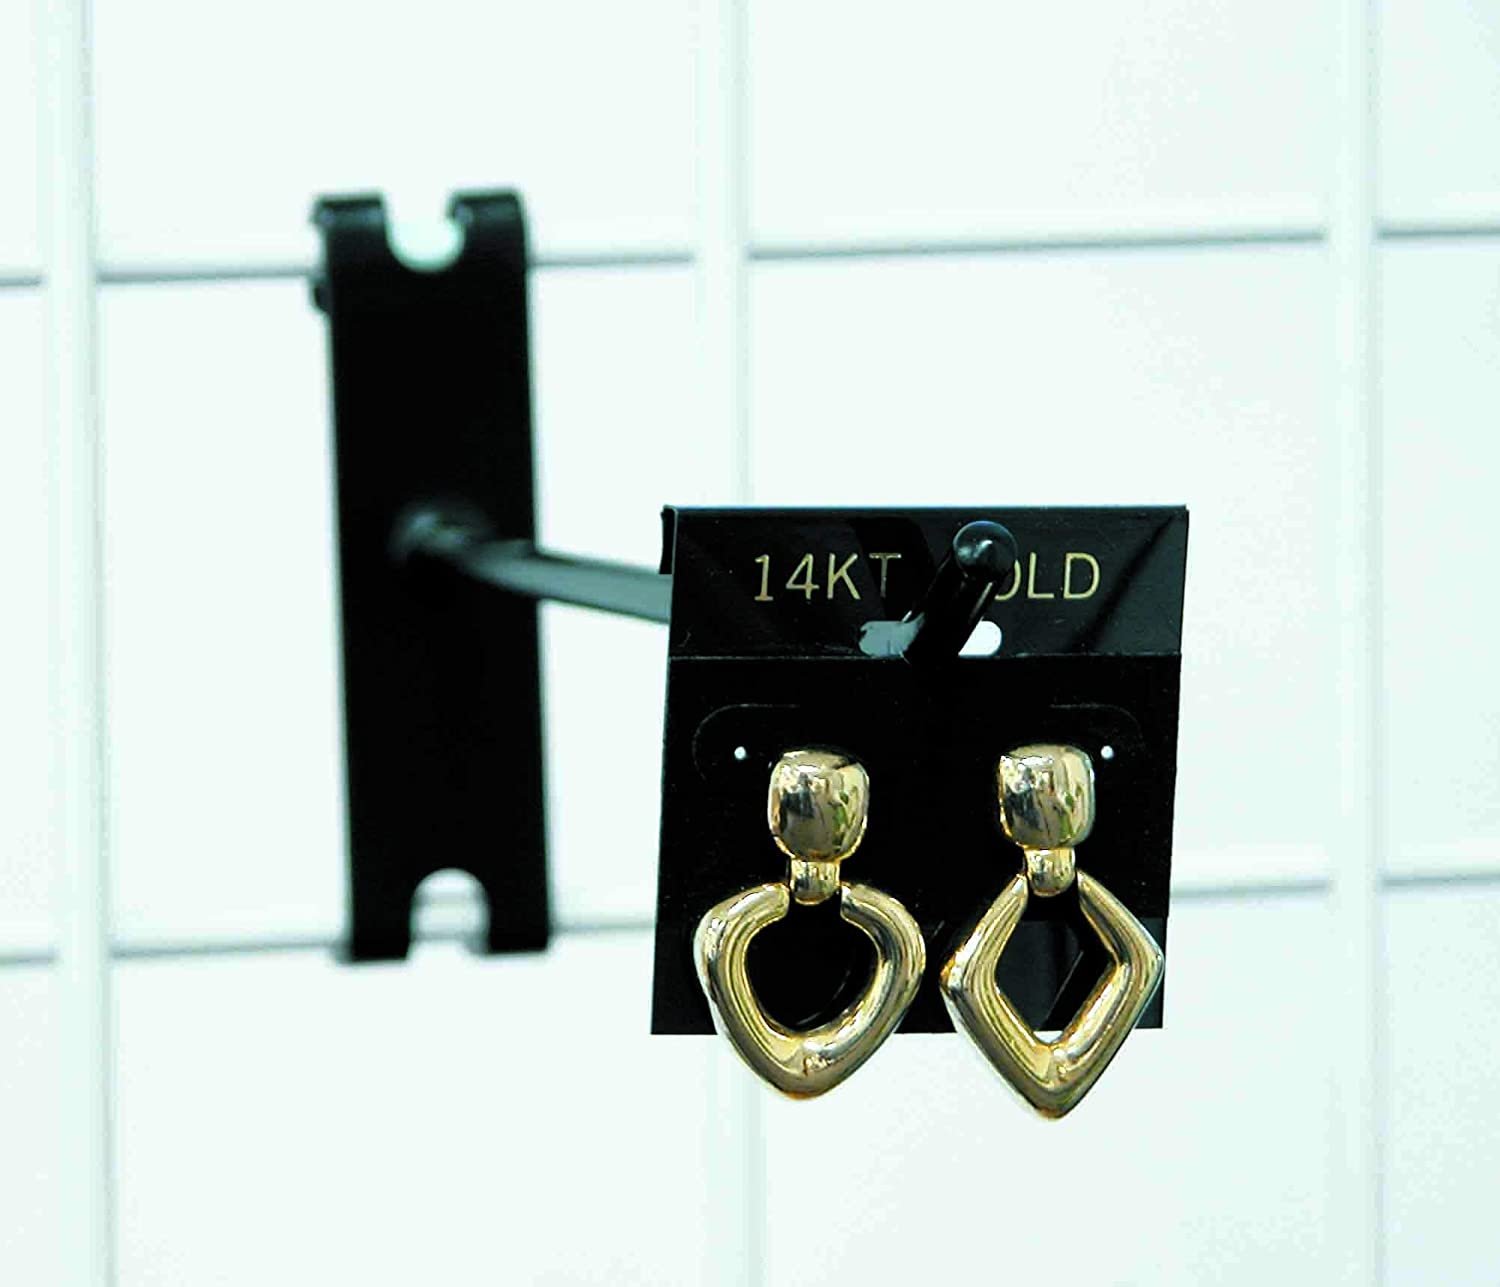 N'icePackaging - 100 Qty 14KT Gold Imprinted White 2" x 2" Hanging Earring Cards - for Displays Hooks or Slatwalls - Merchandise & Sales - Clip/Wire/Post Earrings - image 3 of 3